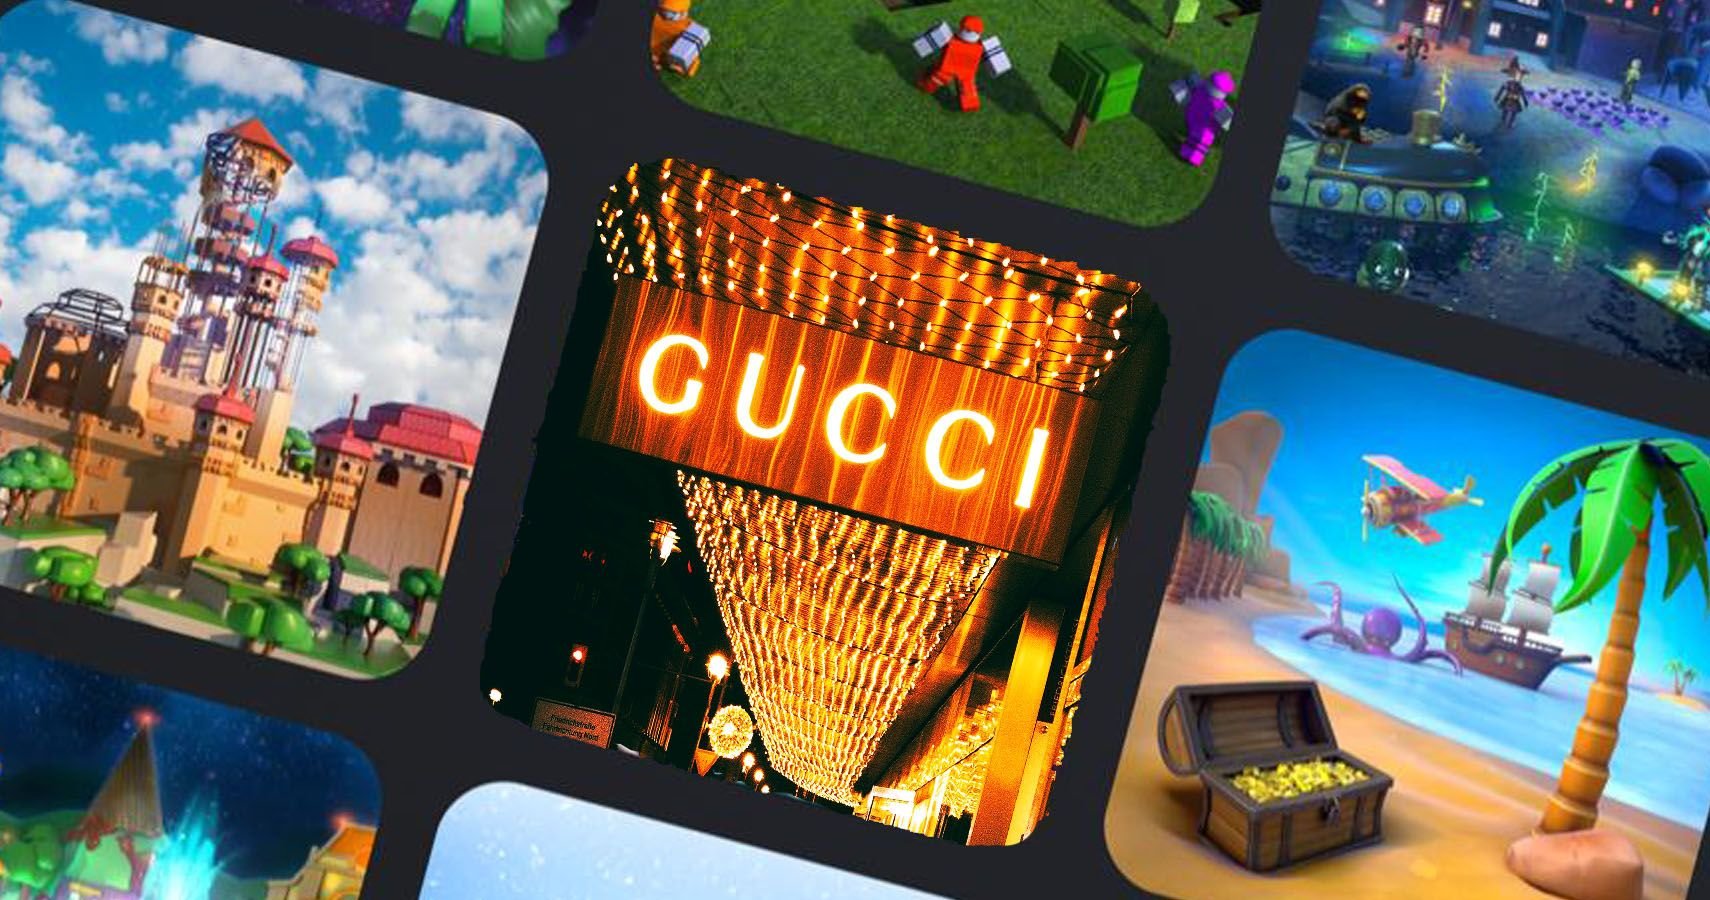 Gucci Partners With Roblox To Offer Exclusive Digital Content